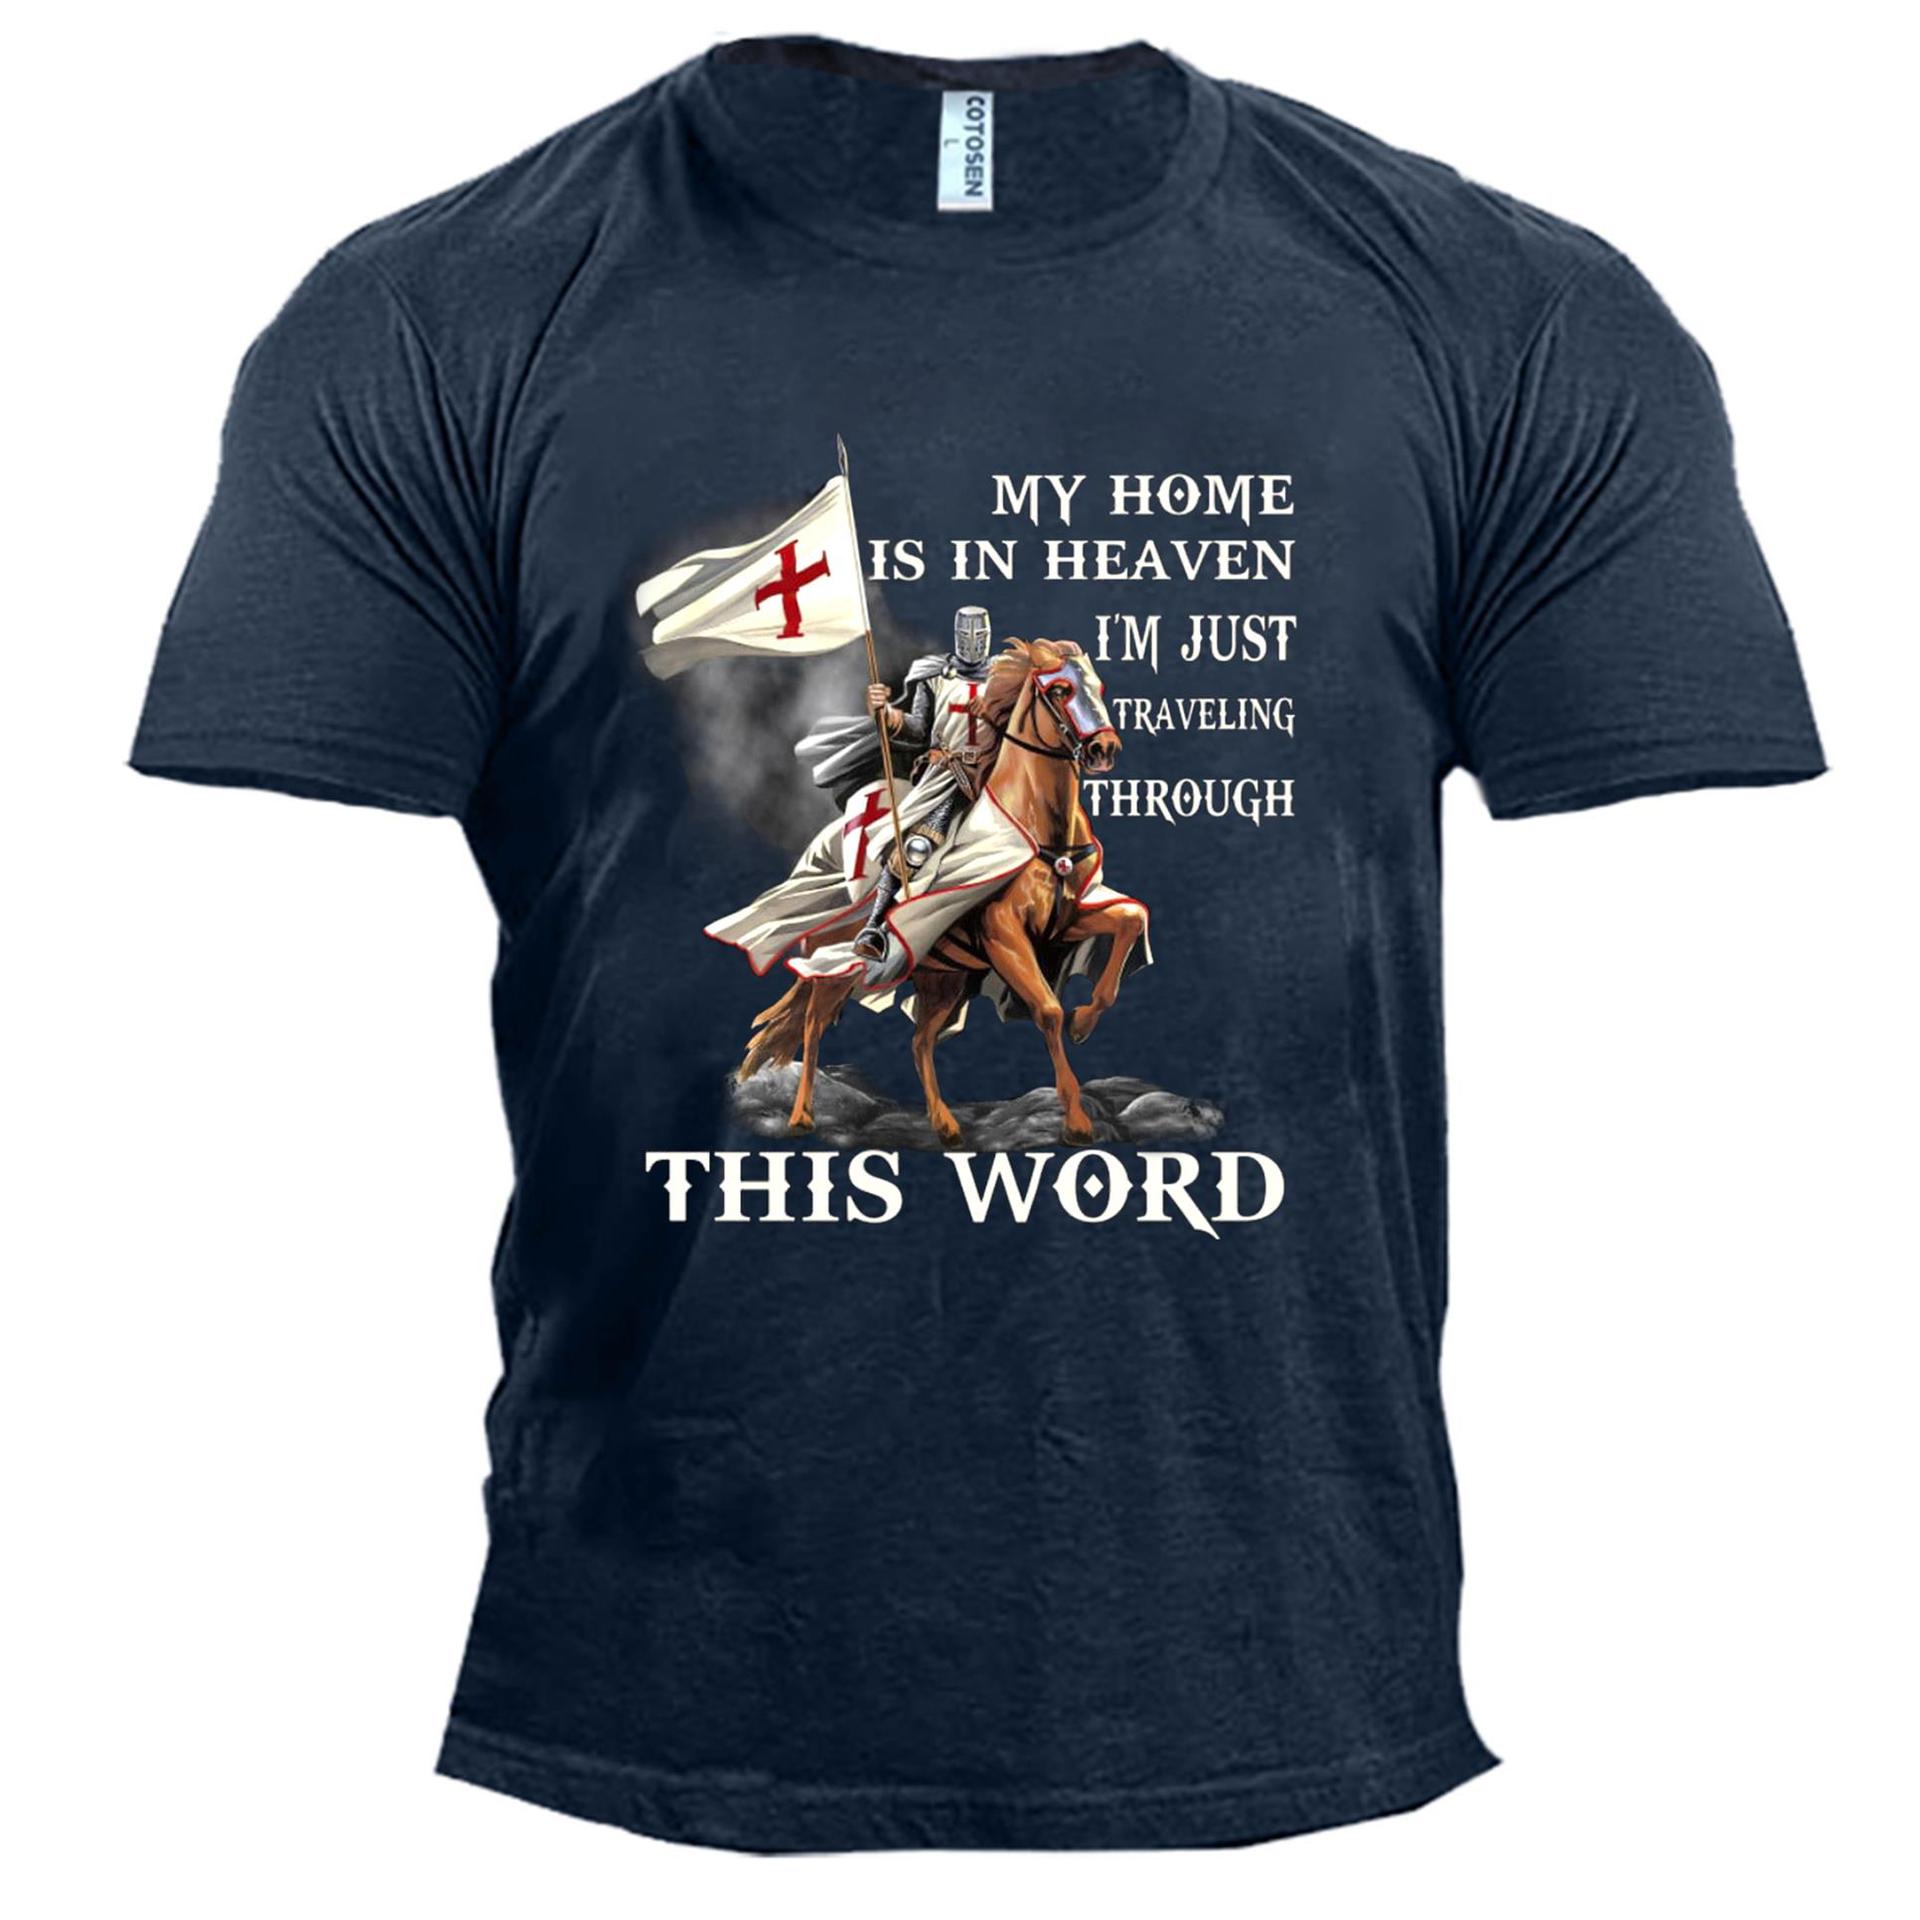 Men's Knights Templar My Chic Home Is Heaven This World Cotton T-shirt